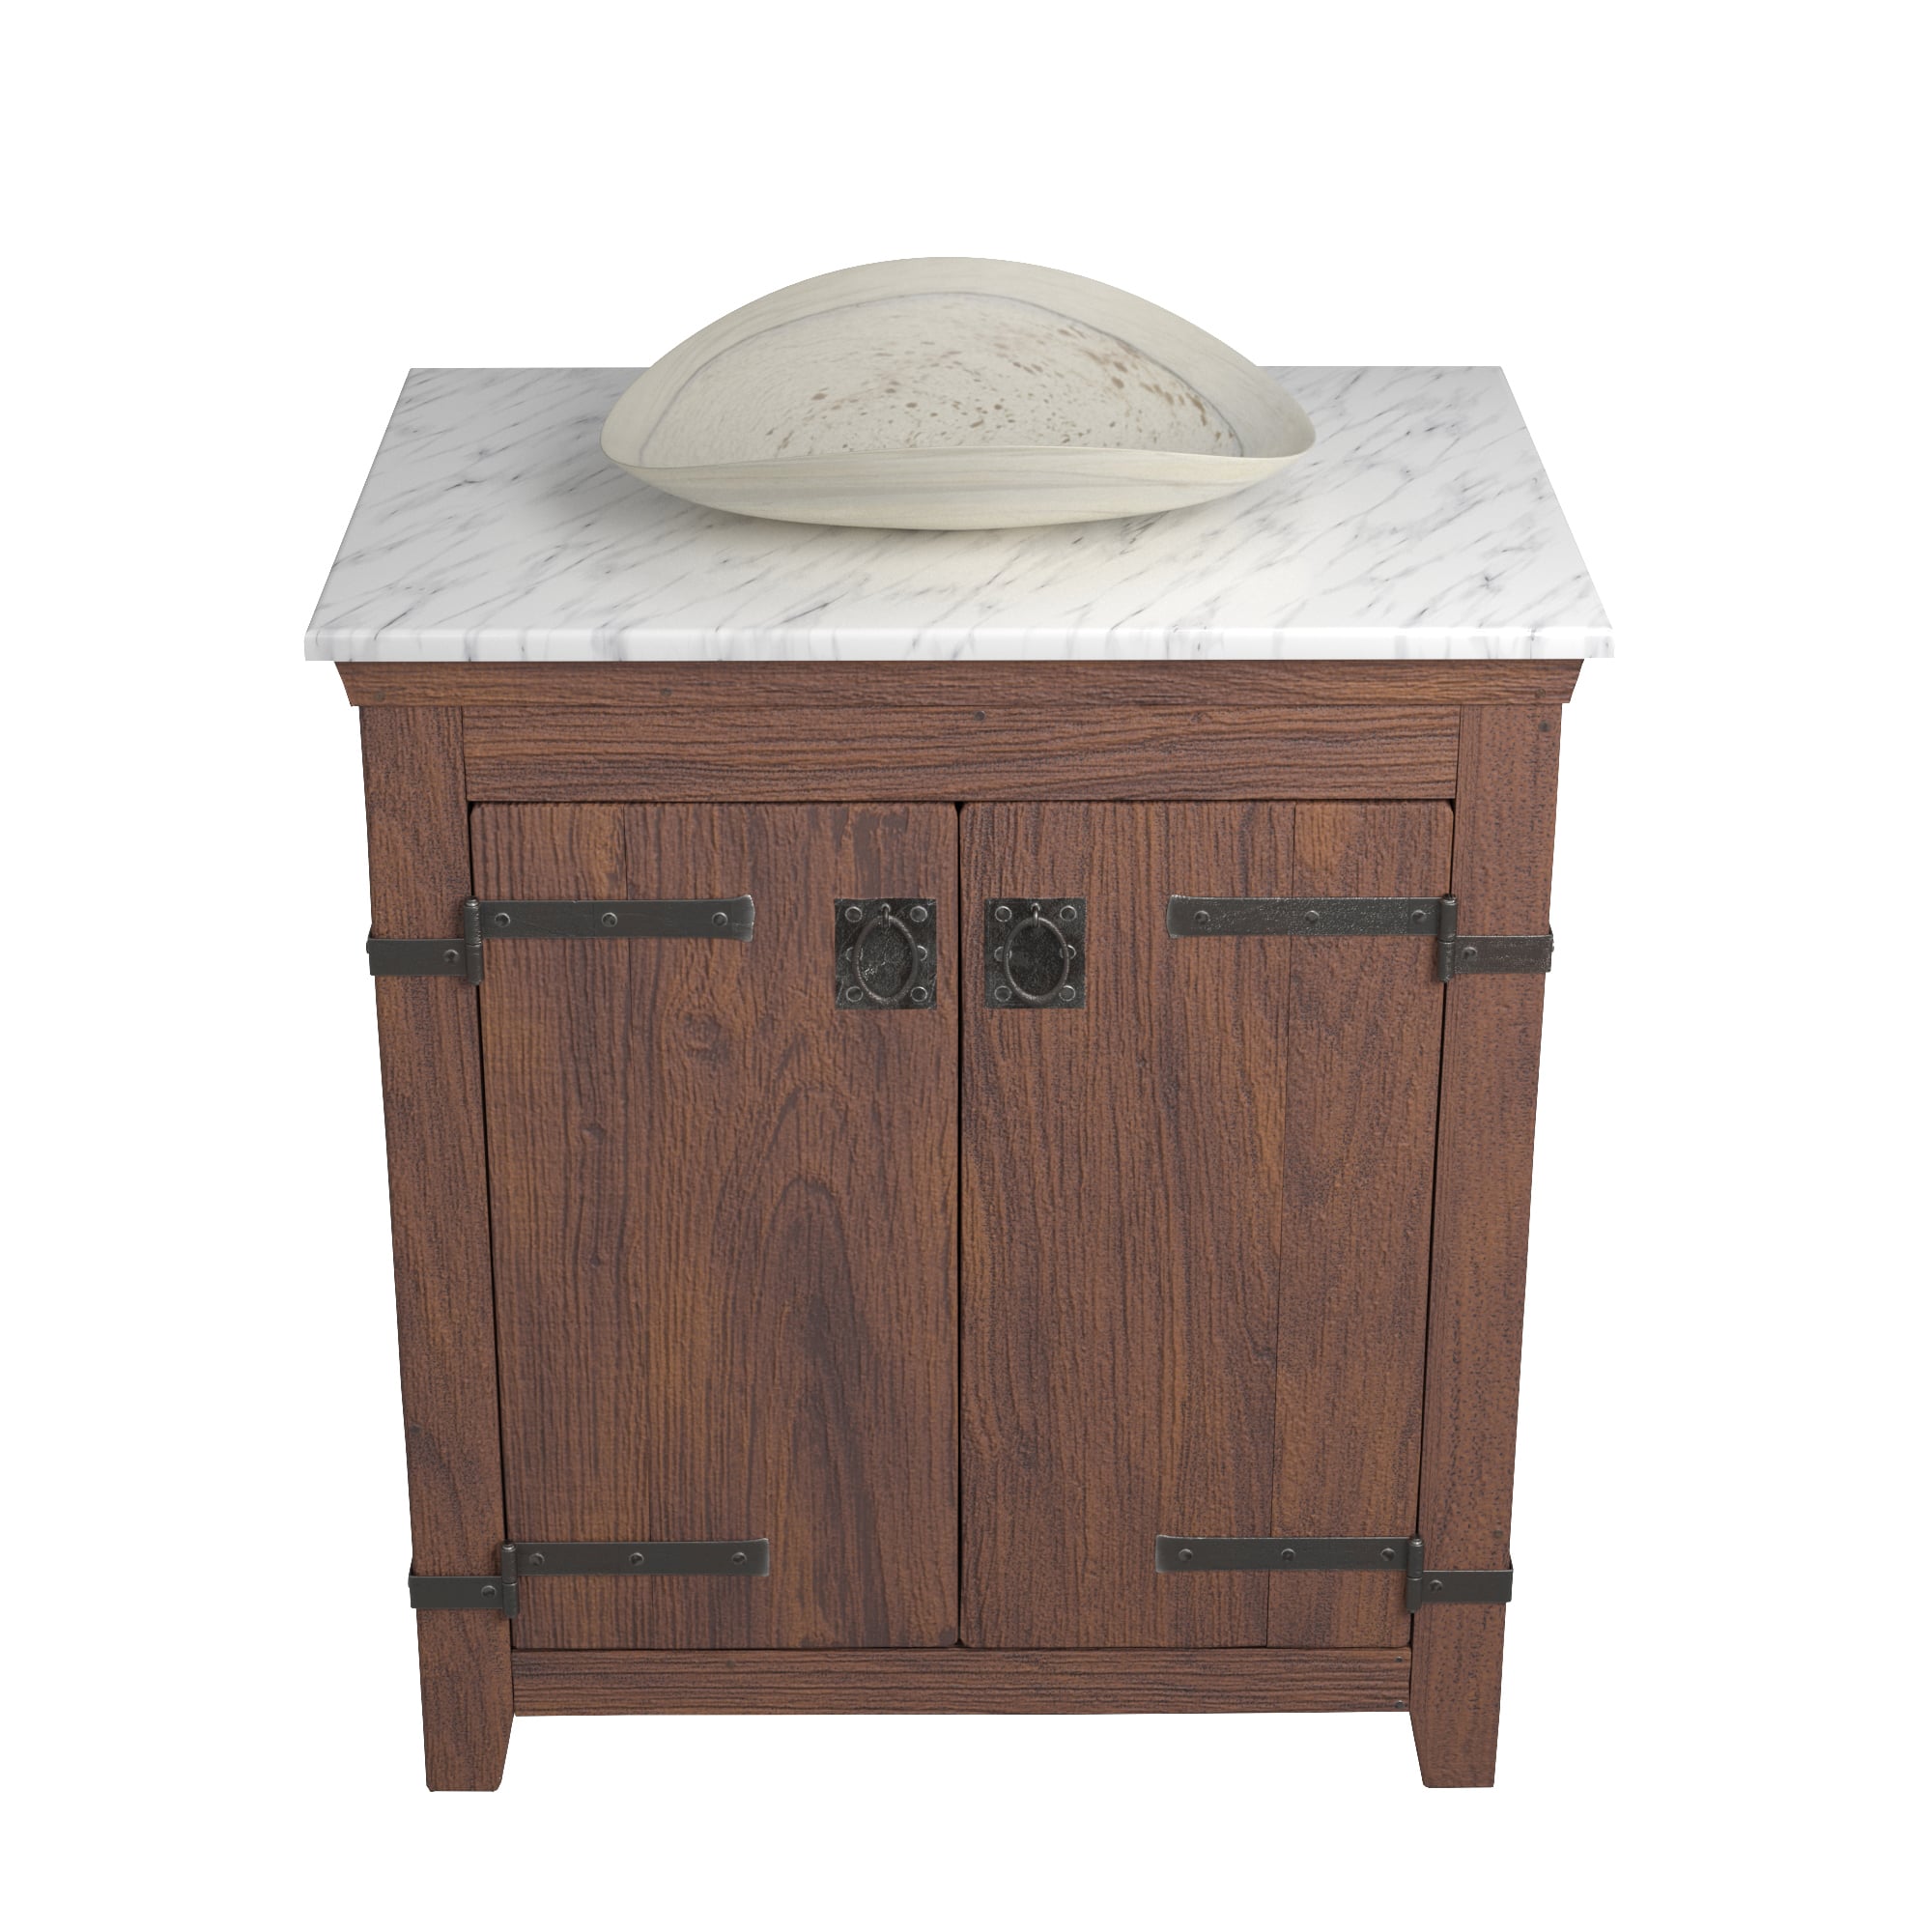 Native Trails 30" Americana Vanity in Chestnut with Carrara Marble Top and Sorrento in Beachcomber, Single Faucet Hole, BND30-VB-CT-MG-107